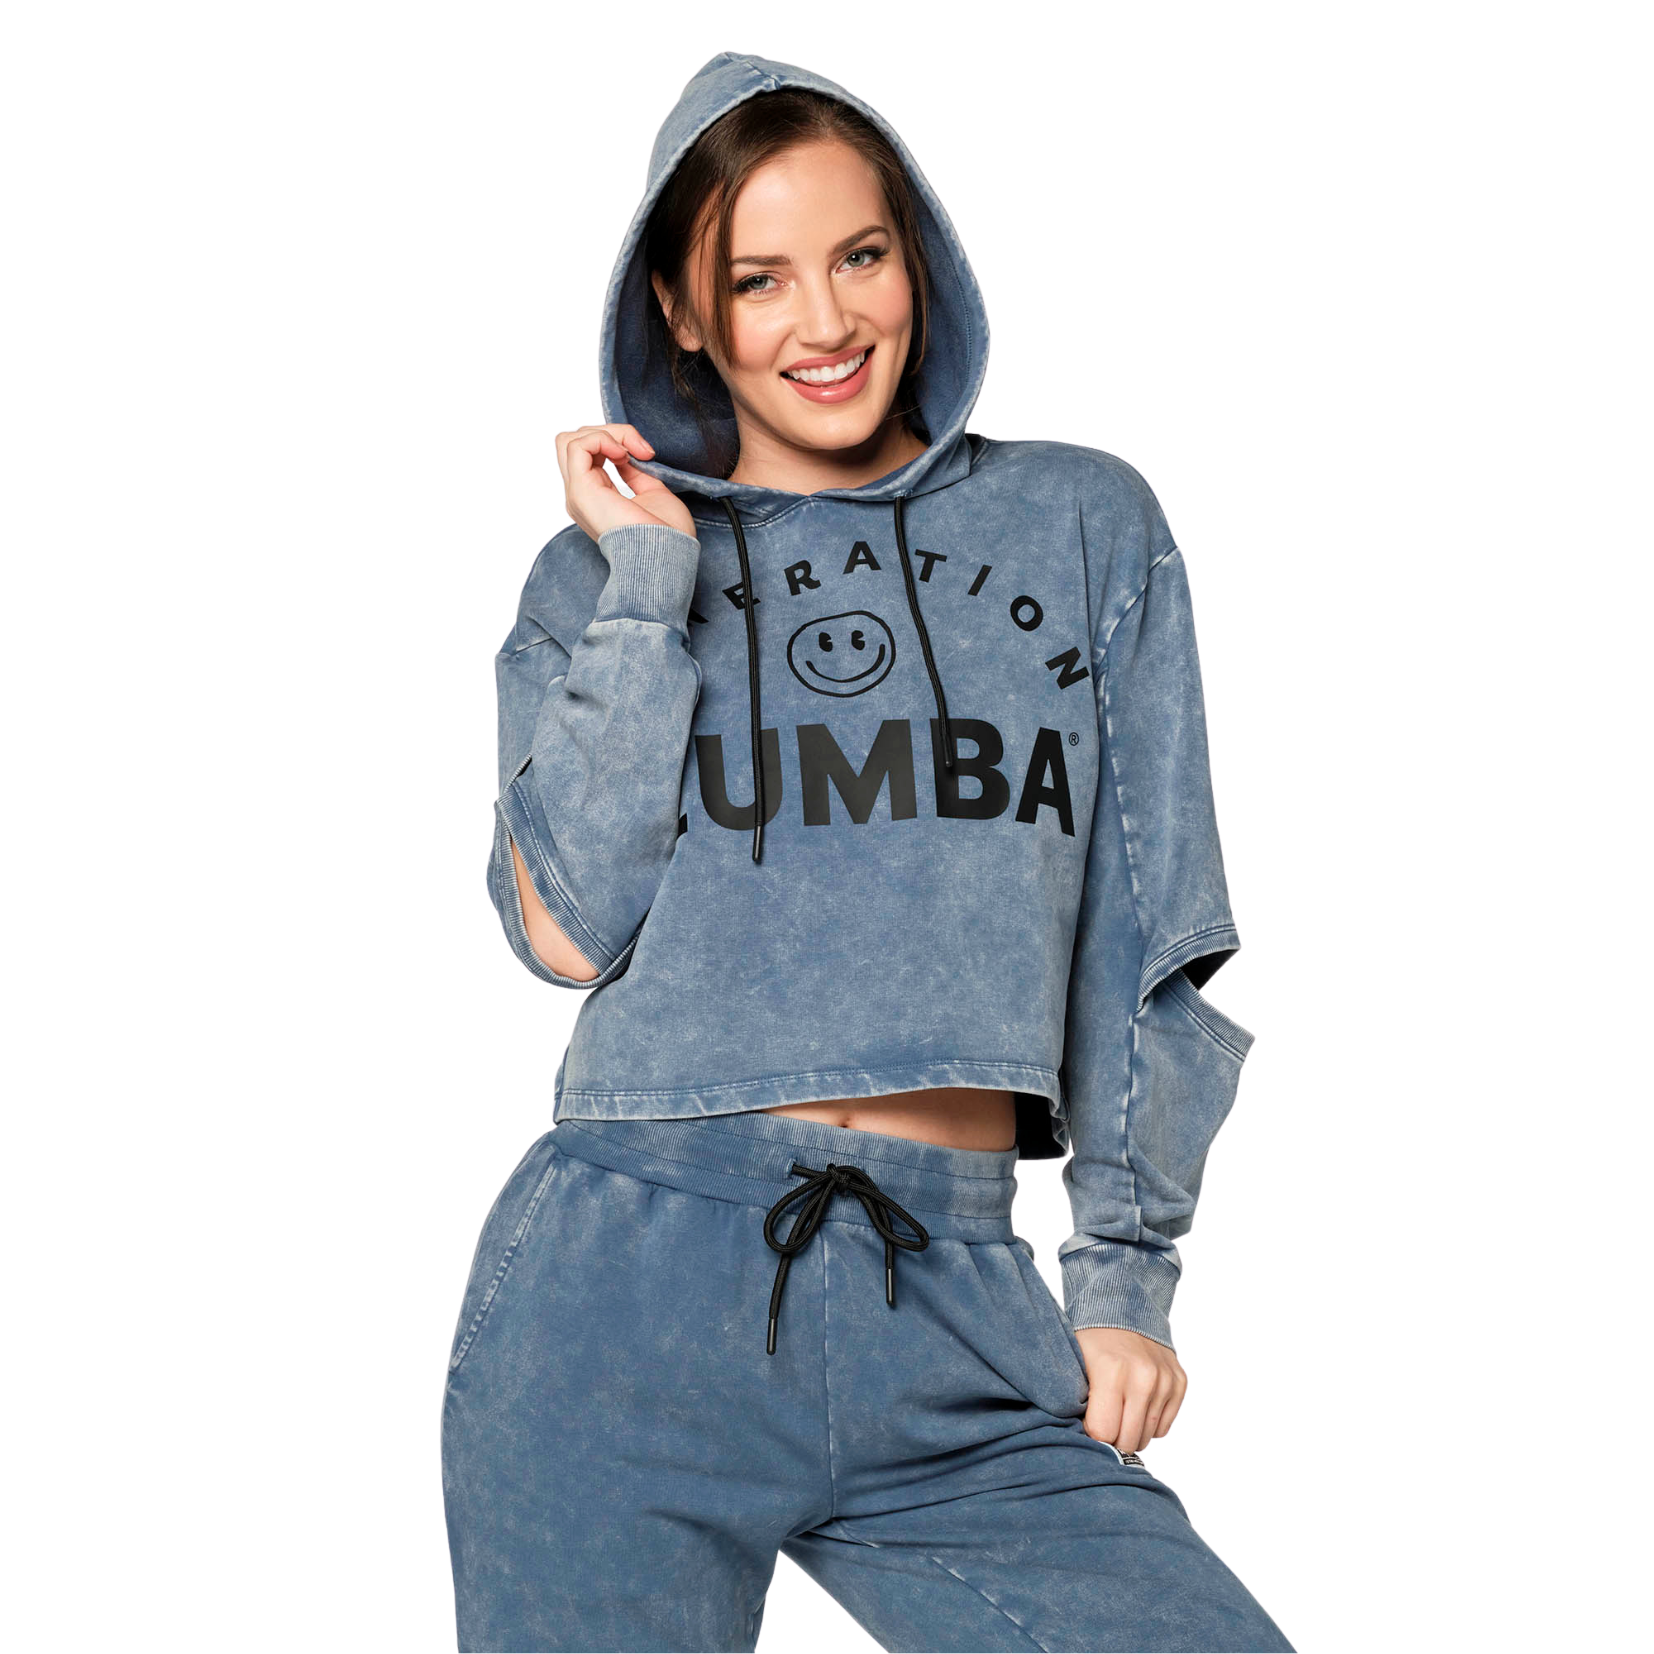 Generation Zumba Cut-Out Crop Pullover Hoodie (Special Order)